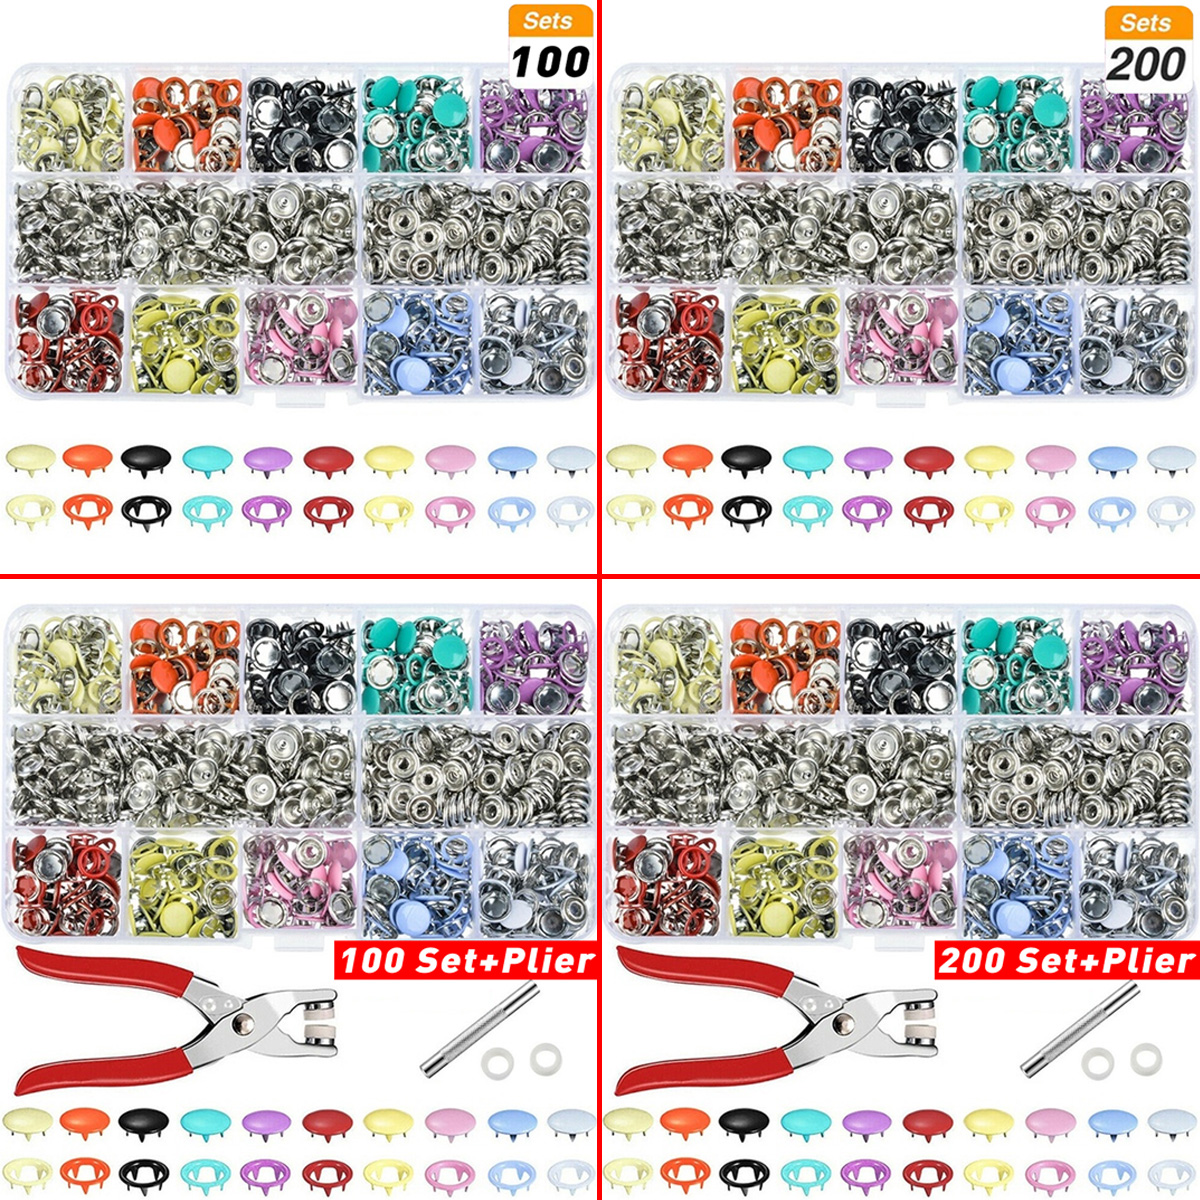 100200-Sets-DIY-Press-Studs-Tools-Kit-Assorted-Colors-Snap-Metal-Sewing-Buttons-1618875-5